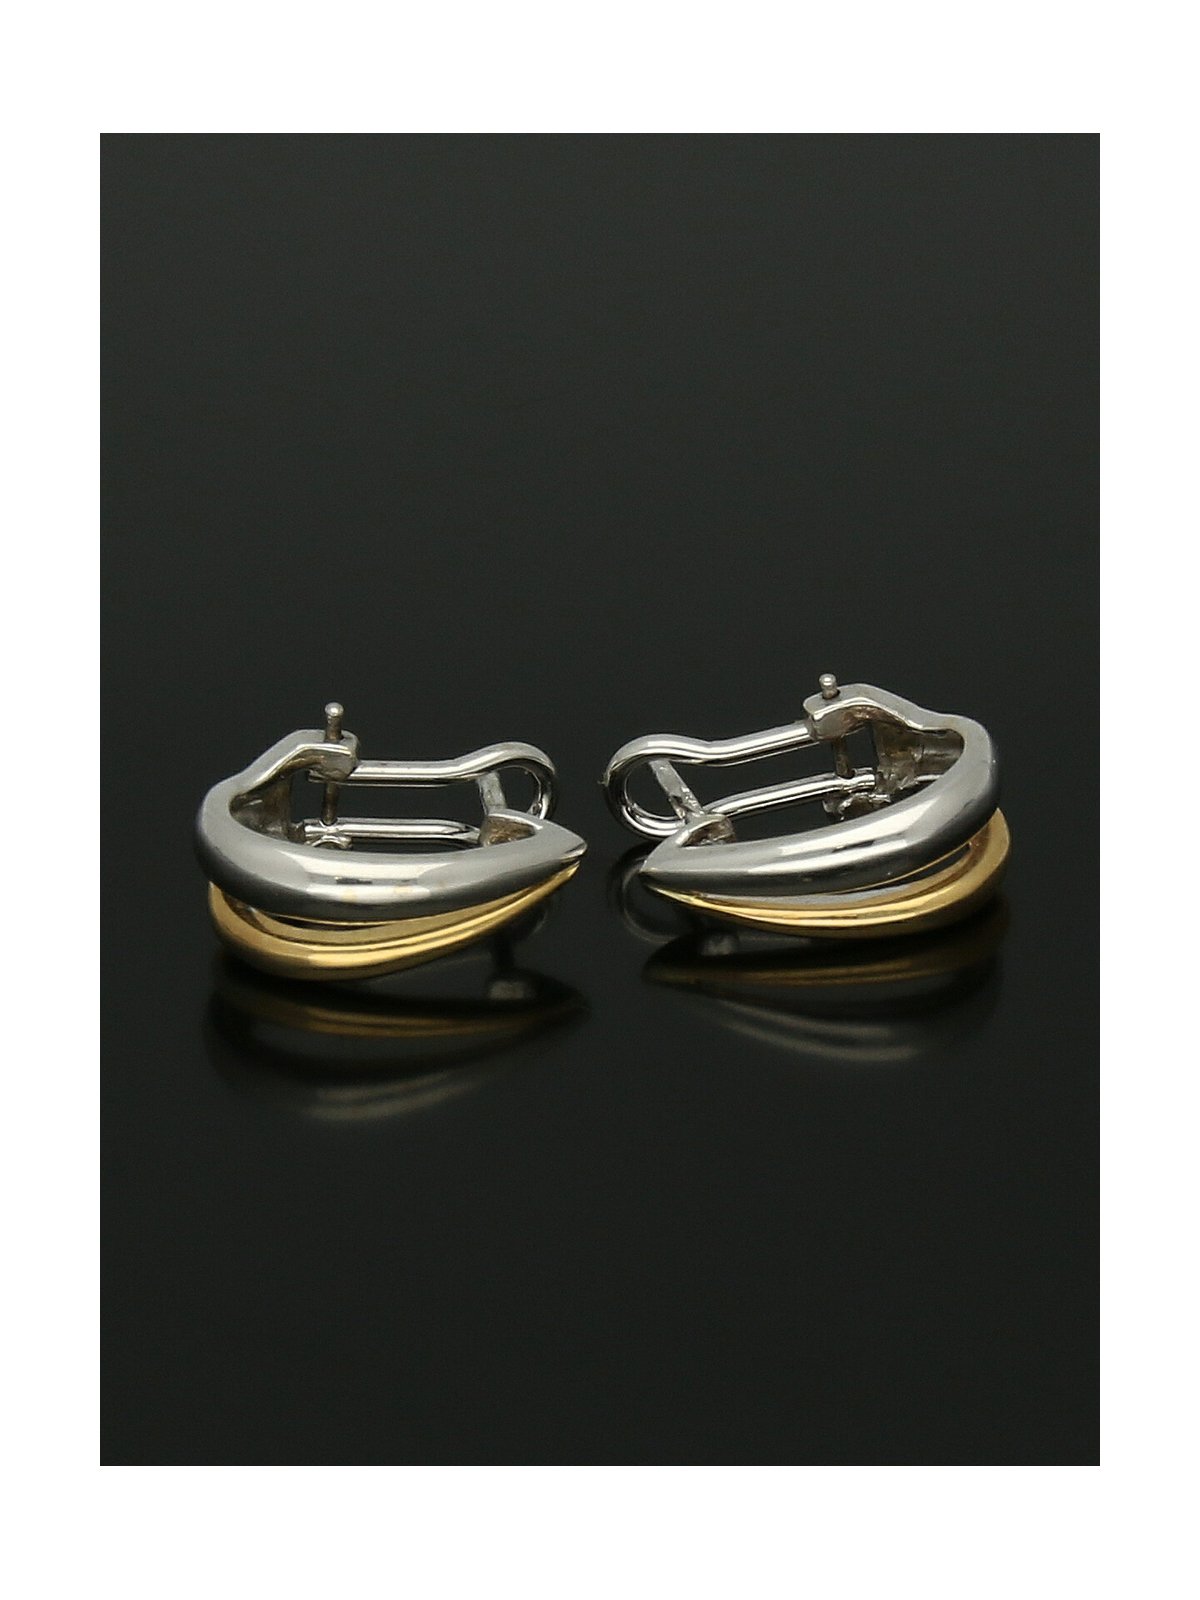 Crossover Hoop Earrings 11x15mm in 9ct Yellow & White Gold